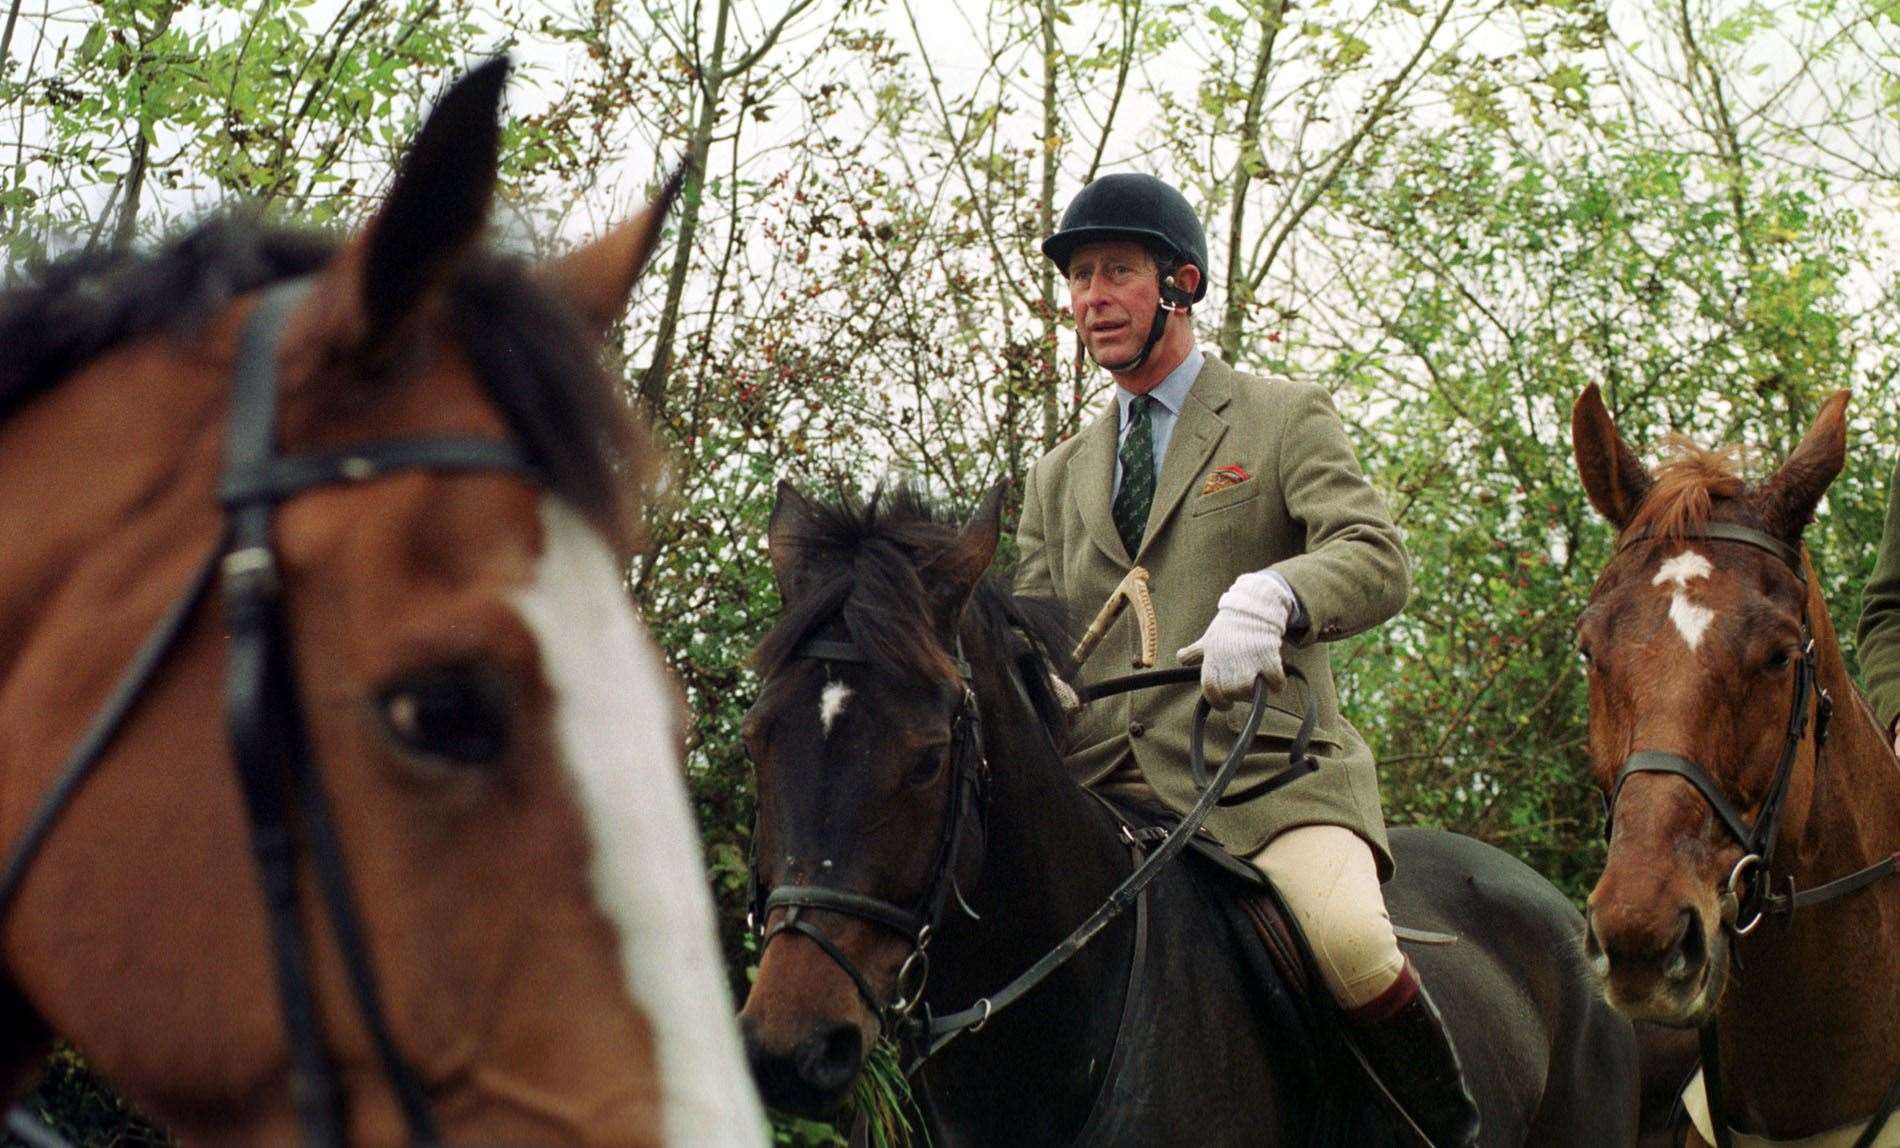 Charles foxhunting with the Beaufort Hunt in 1999 (Barry Batchelor/PA)